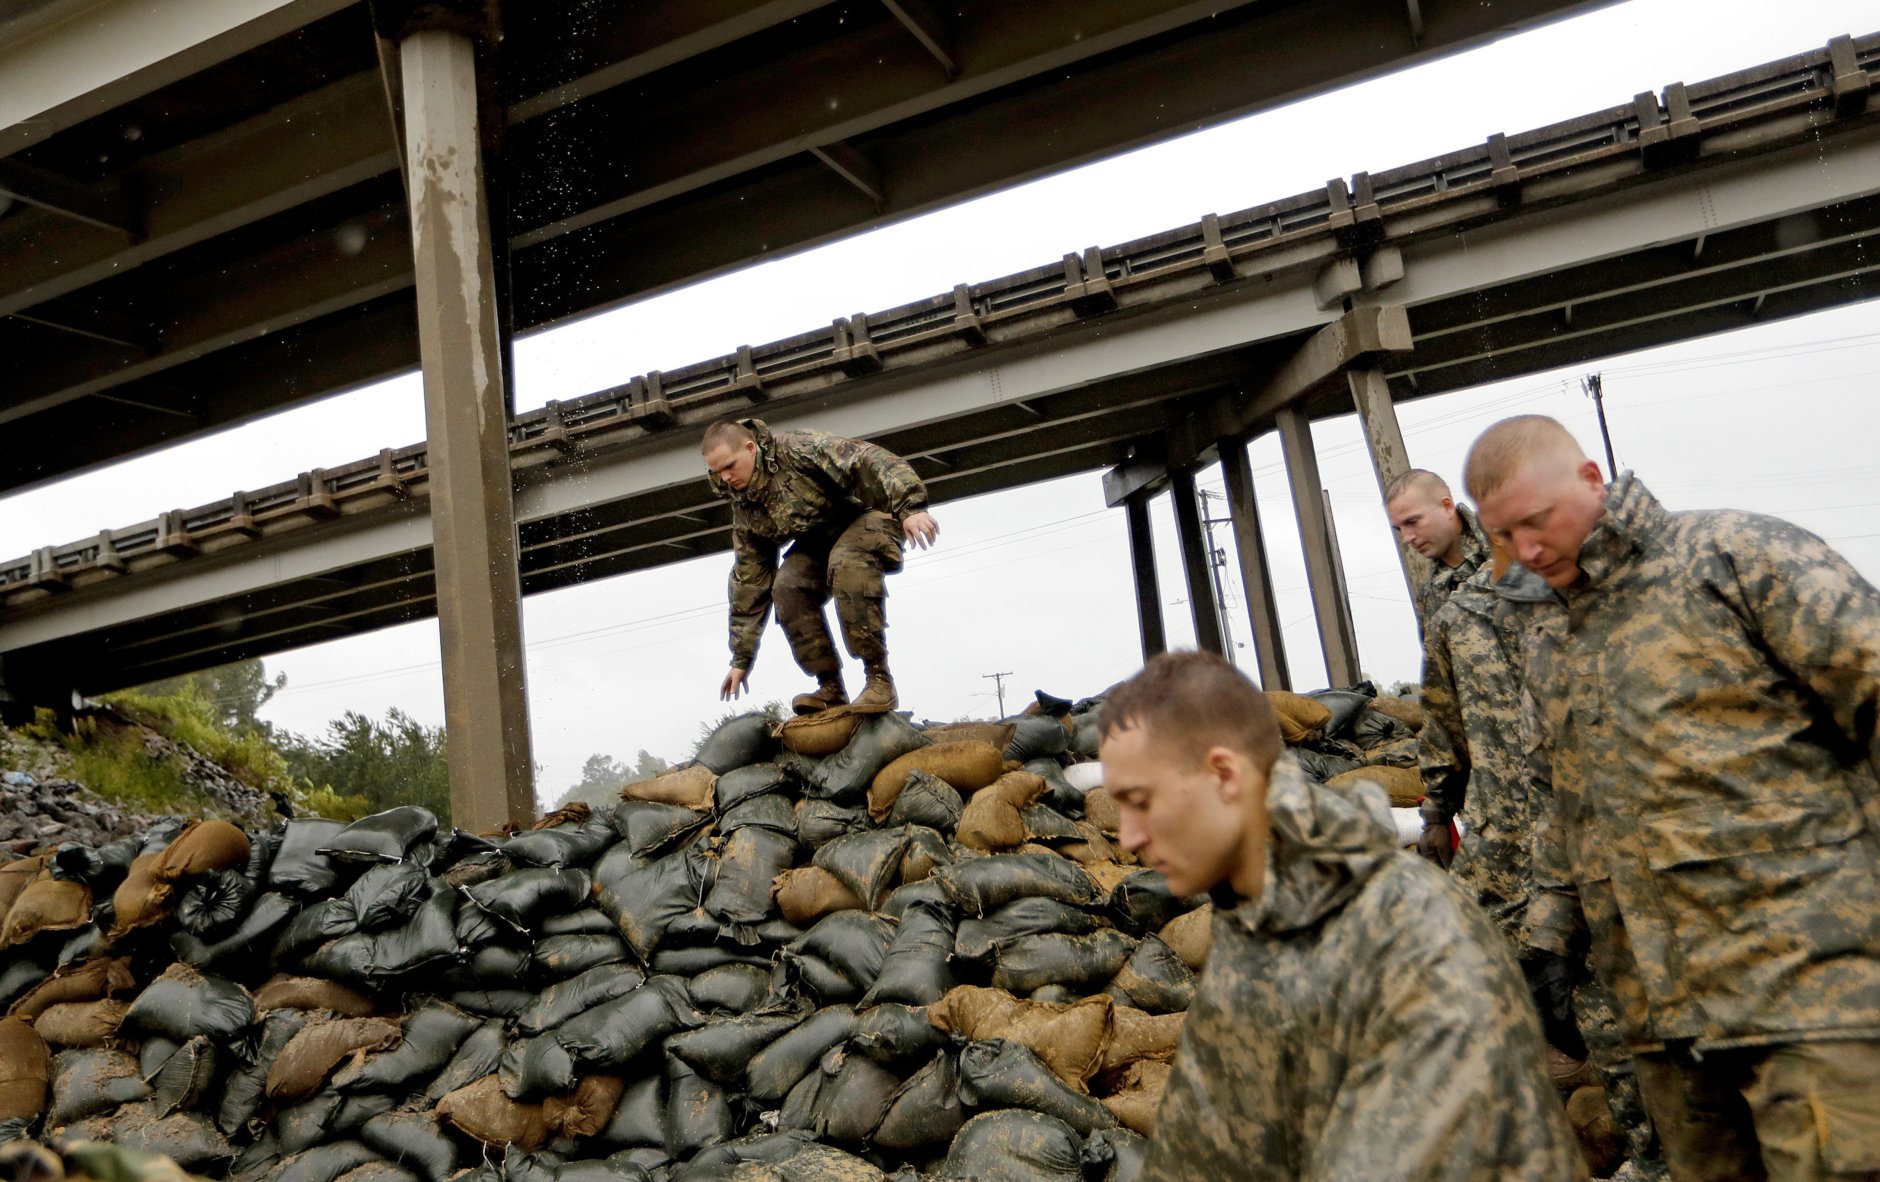 Members of the North Carolina National Guard finish stacking sand bags under a highway overpass near the Lumber River which is expected to flood from Hurricane Florence's rain in Lumberton, N.C., Friday, Sept. 14, 2018. (AP Photo/David Goldman)